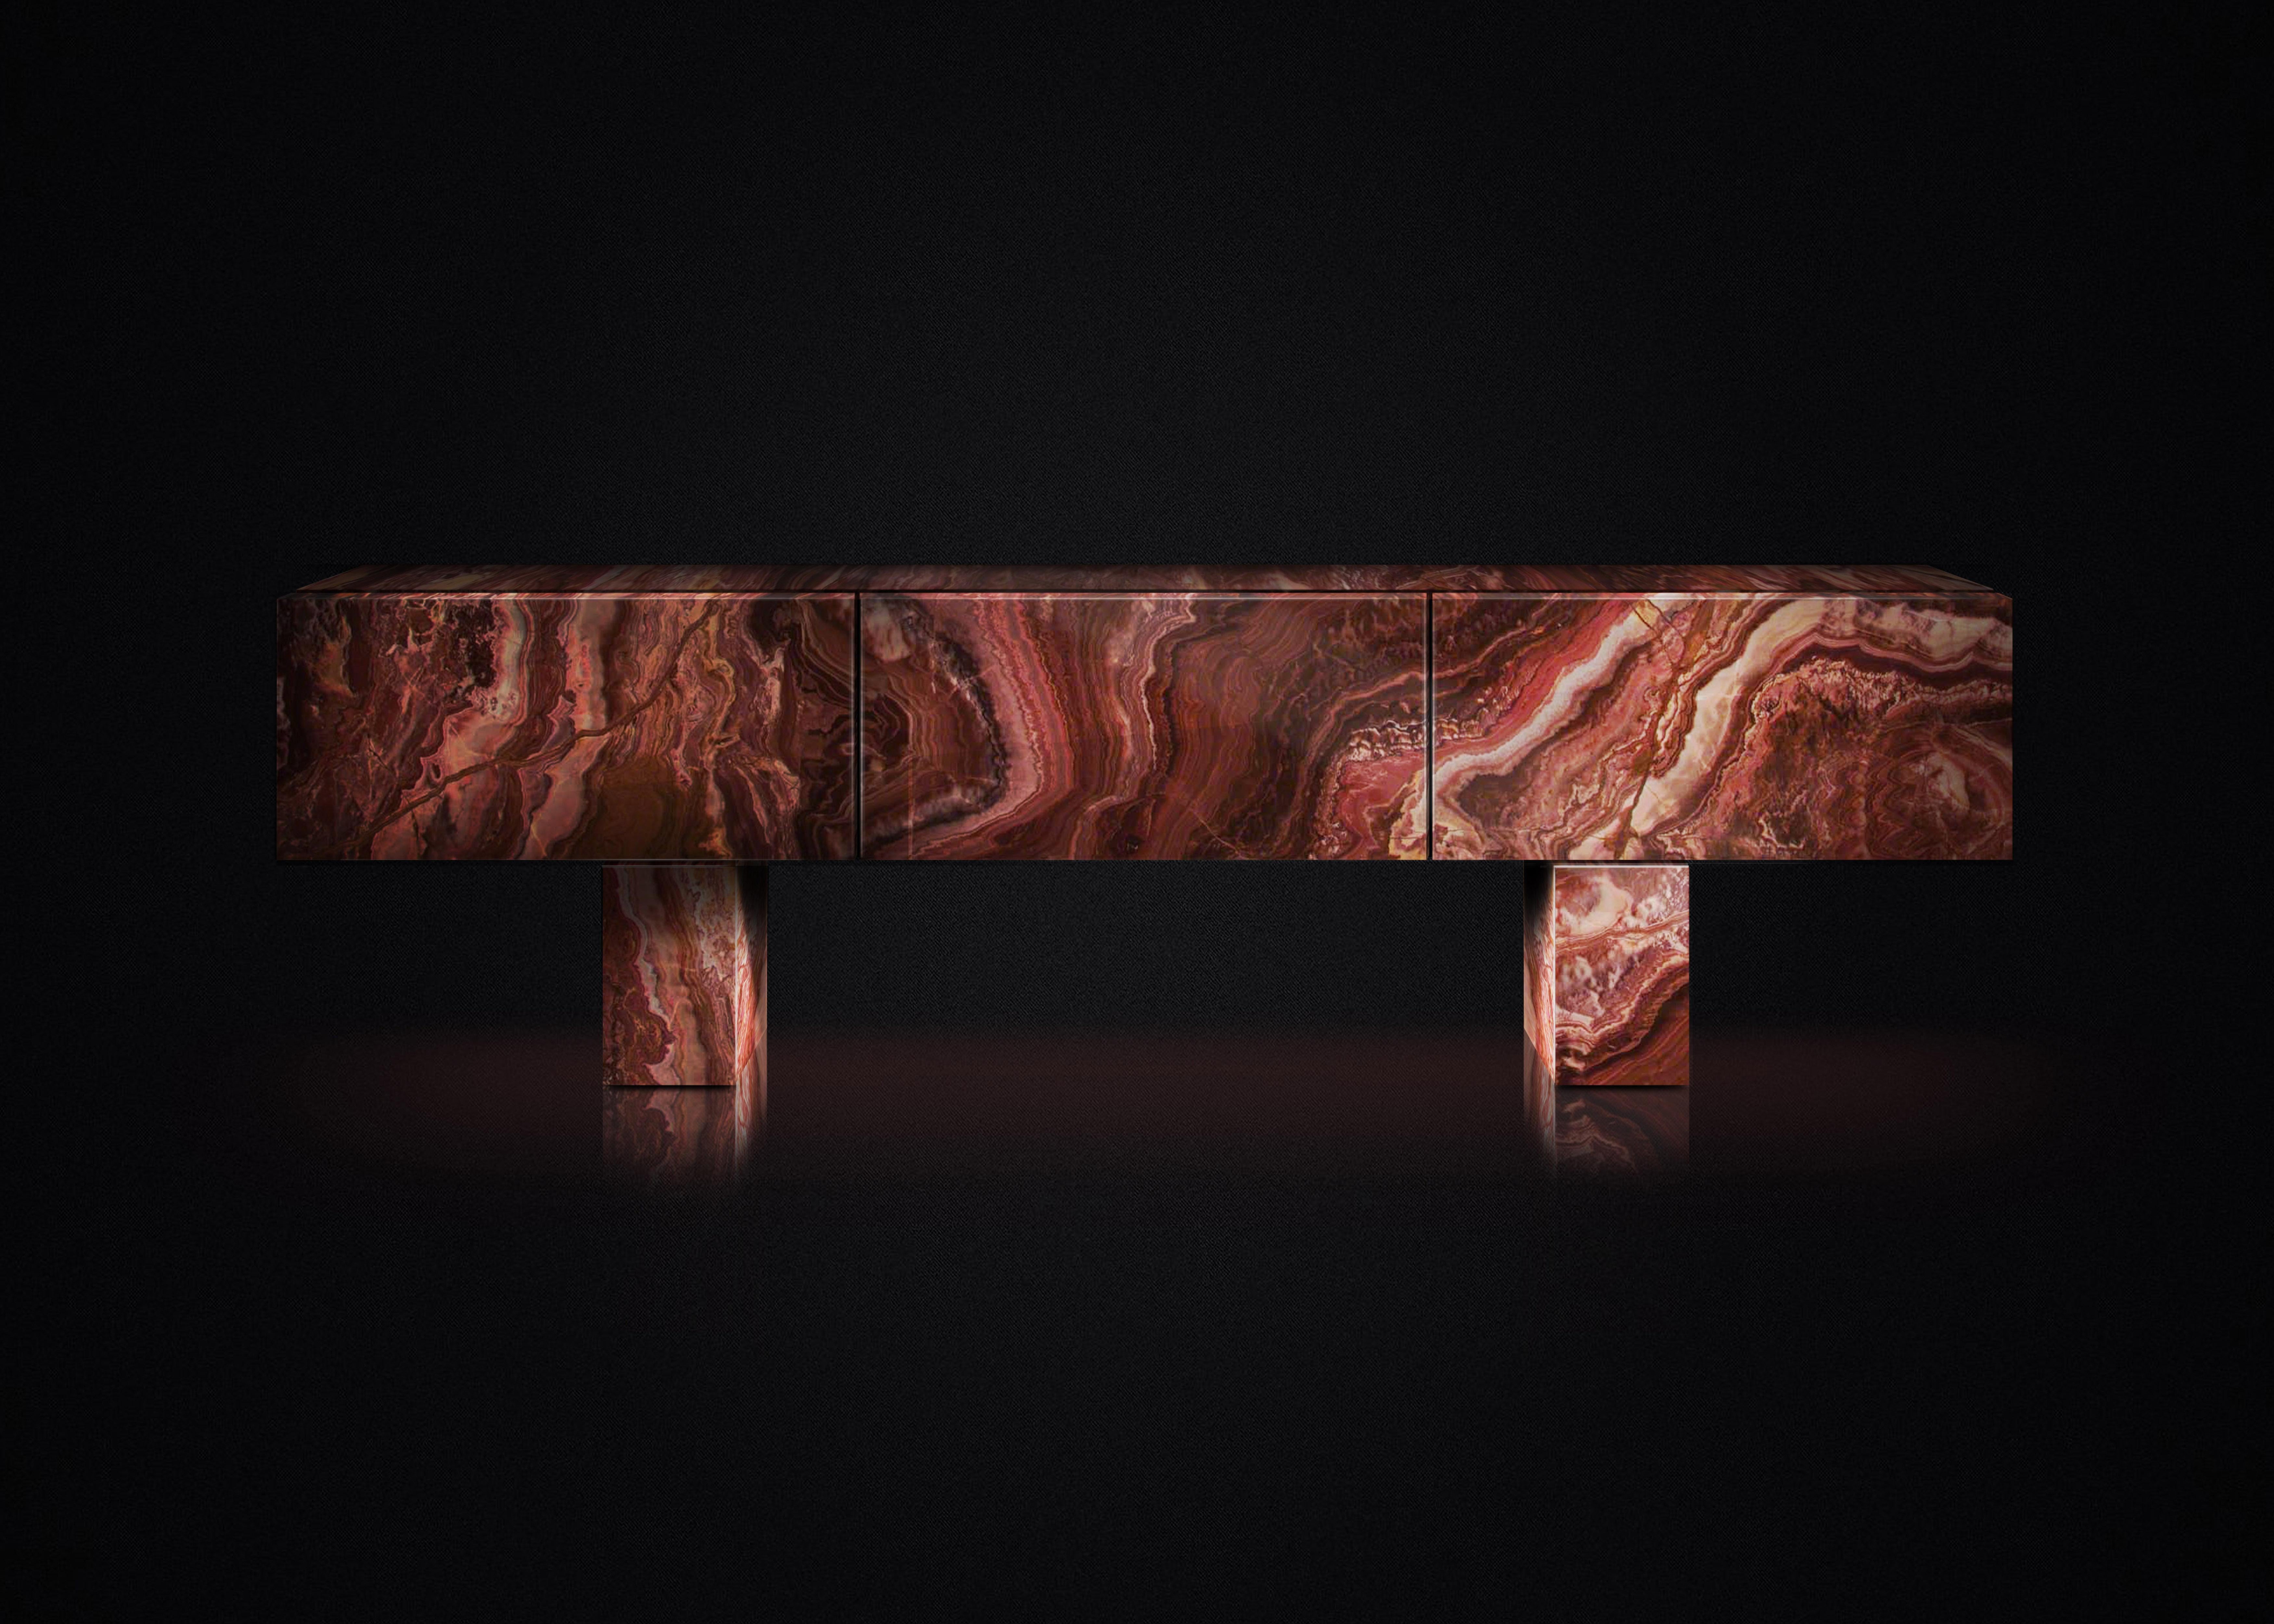 Console Diablo.

Directly inspired by natural beauty of Iceland. Made of Red Passion Onyx stone. Interior Macassar Ebony,
Contemporary, luxurious and impeccably crafted, this credenza makes a beautiful home investment. The design works a